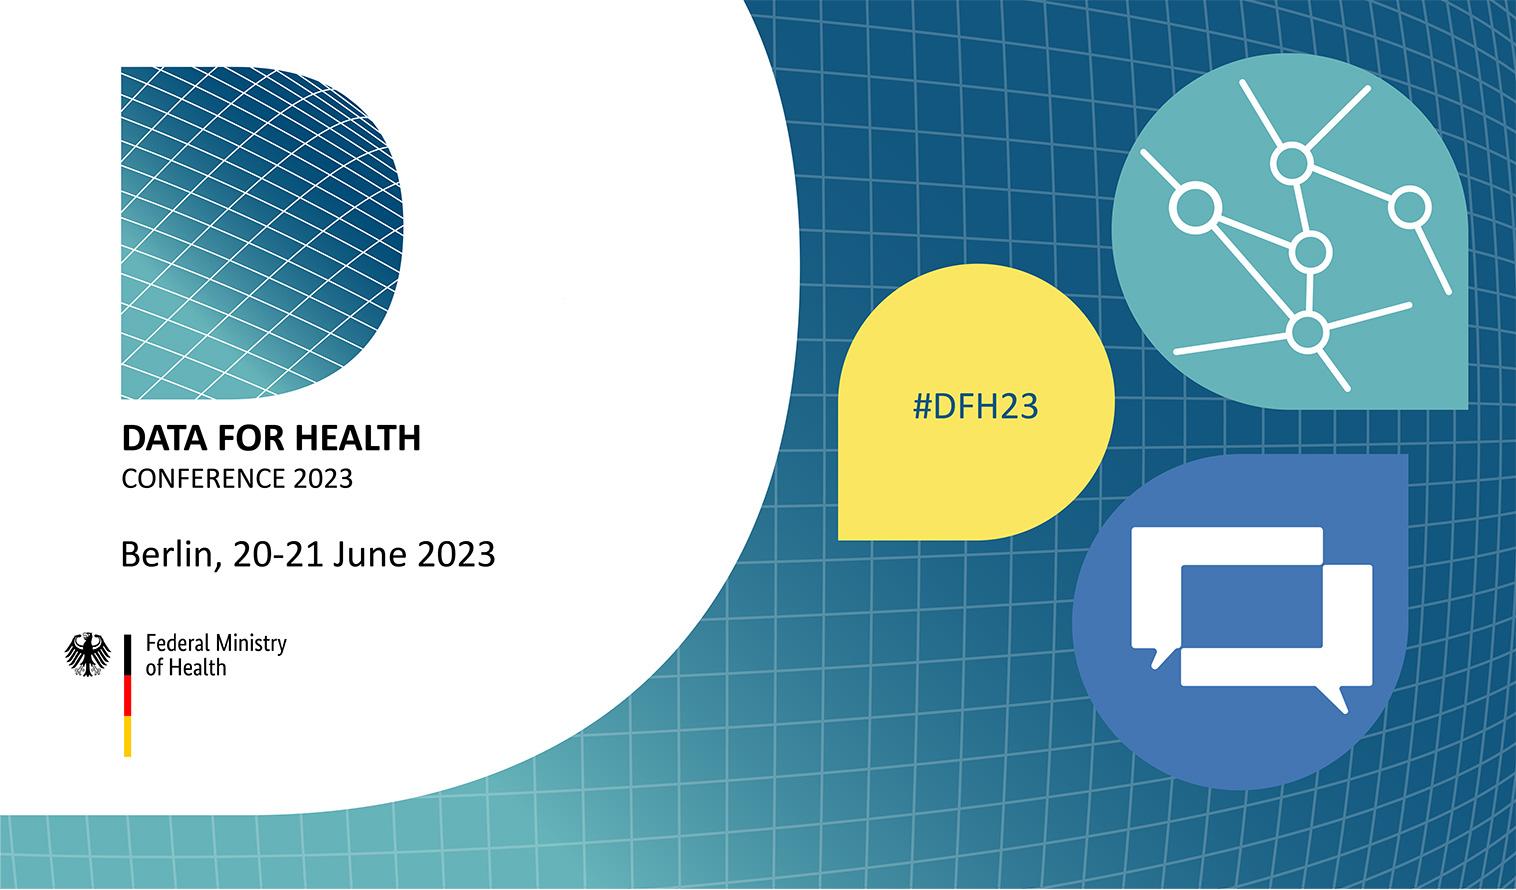 Data for Health Conference 2023